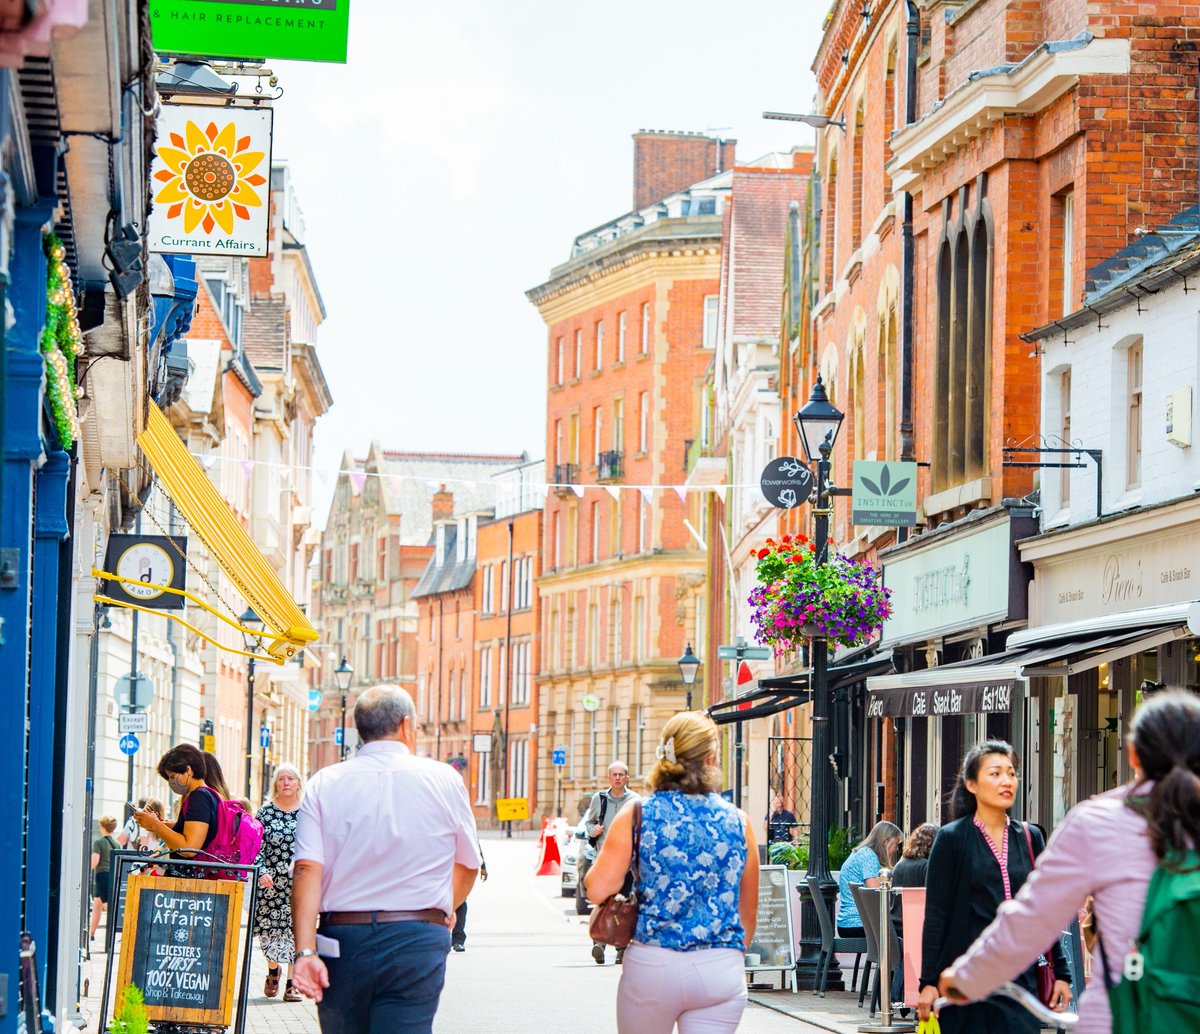 So why is Leicester one of the UK's top destinations? This article in the @metroUK praises our 'friendly and walkable' city plus all the fantastic surrounding attractions. Check it out here ow.ly/JjRf50RybQc #visitleicester #leicester #destination #staycation